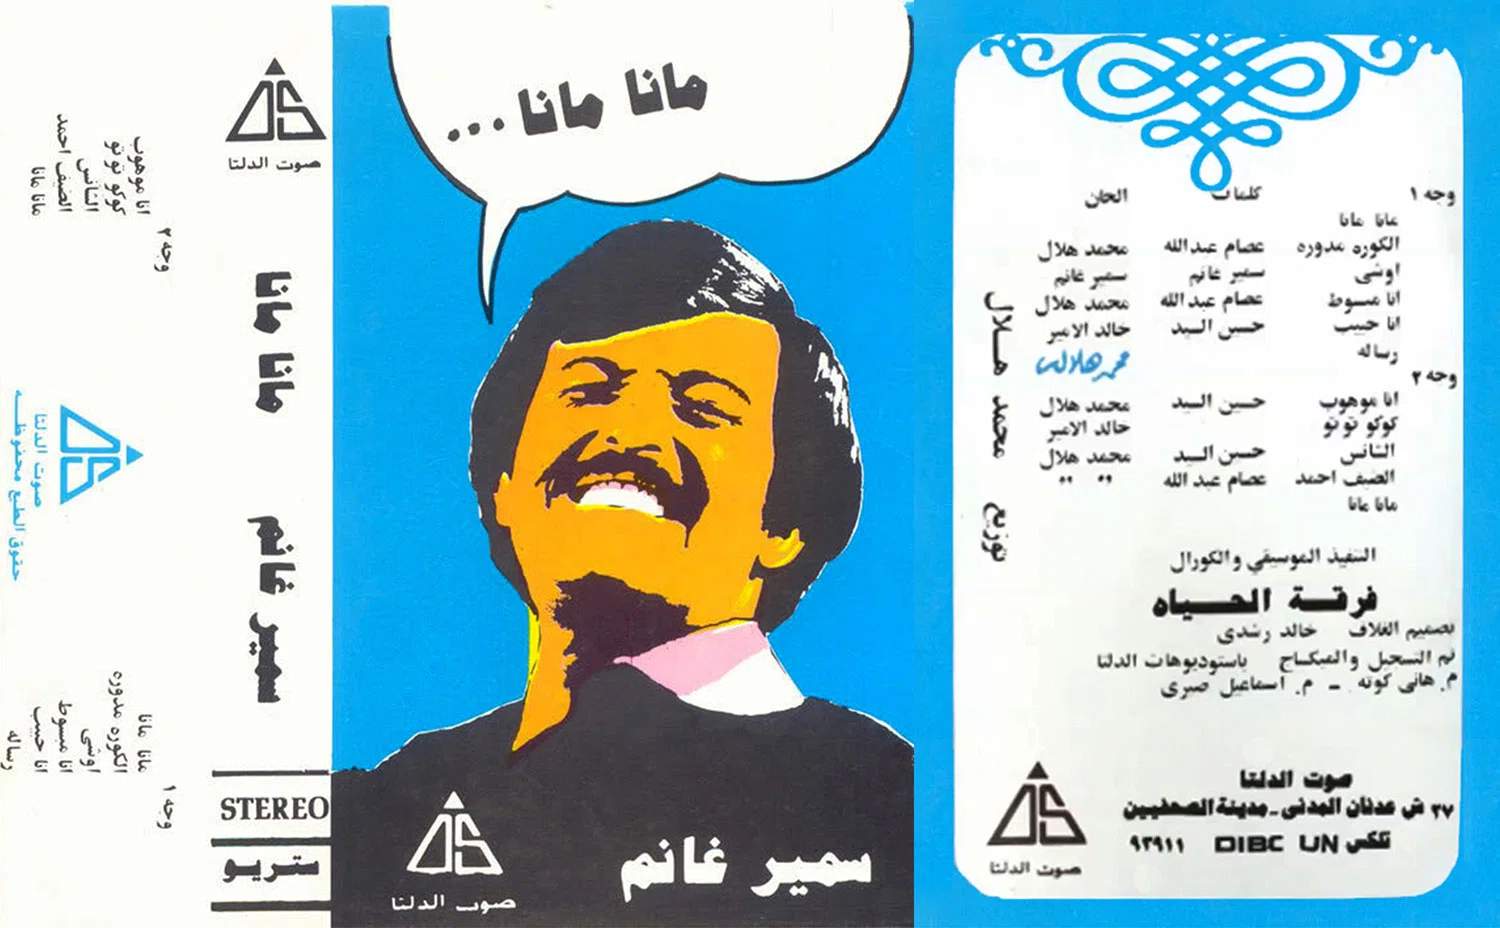 amr-hamid-egyptian-cassette-archive-graphic-design-itsnicethat-01.jpg